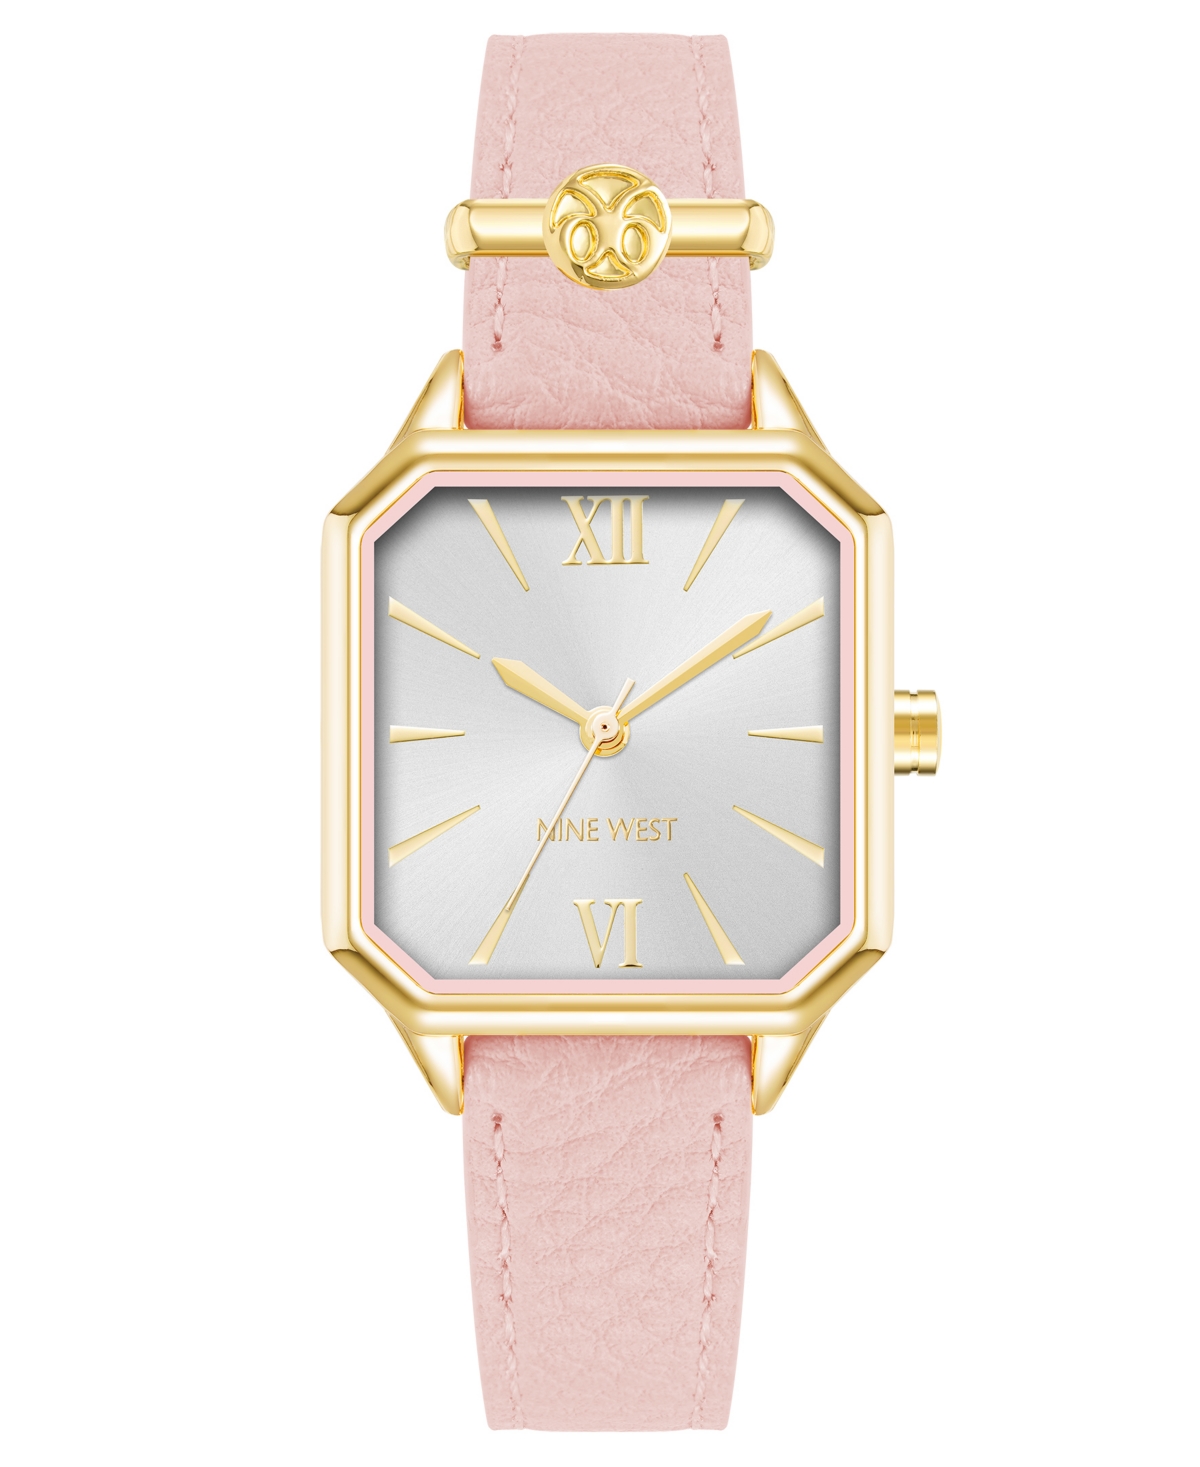 Nine West Women's Quartz Square Pink Faux Leather Band Watch, 27mm In Pink,gold-tone